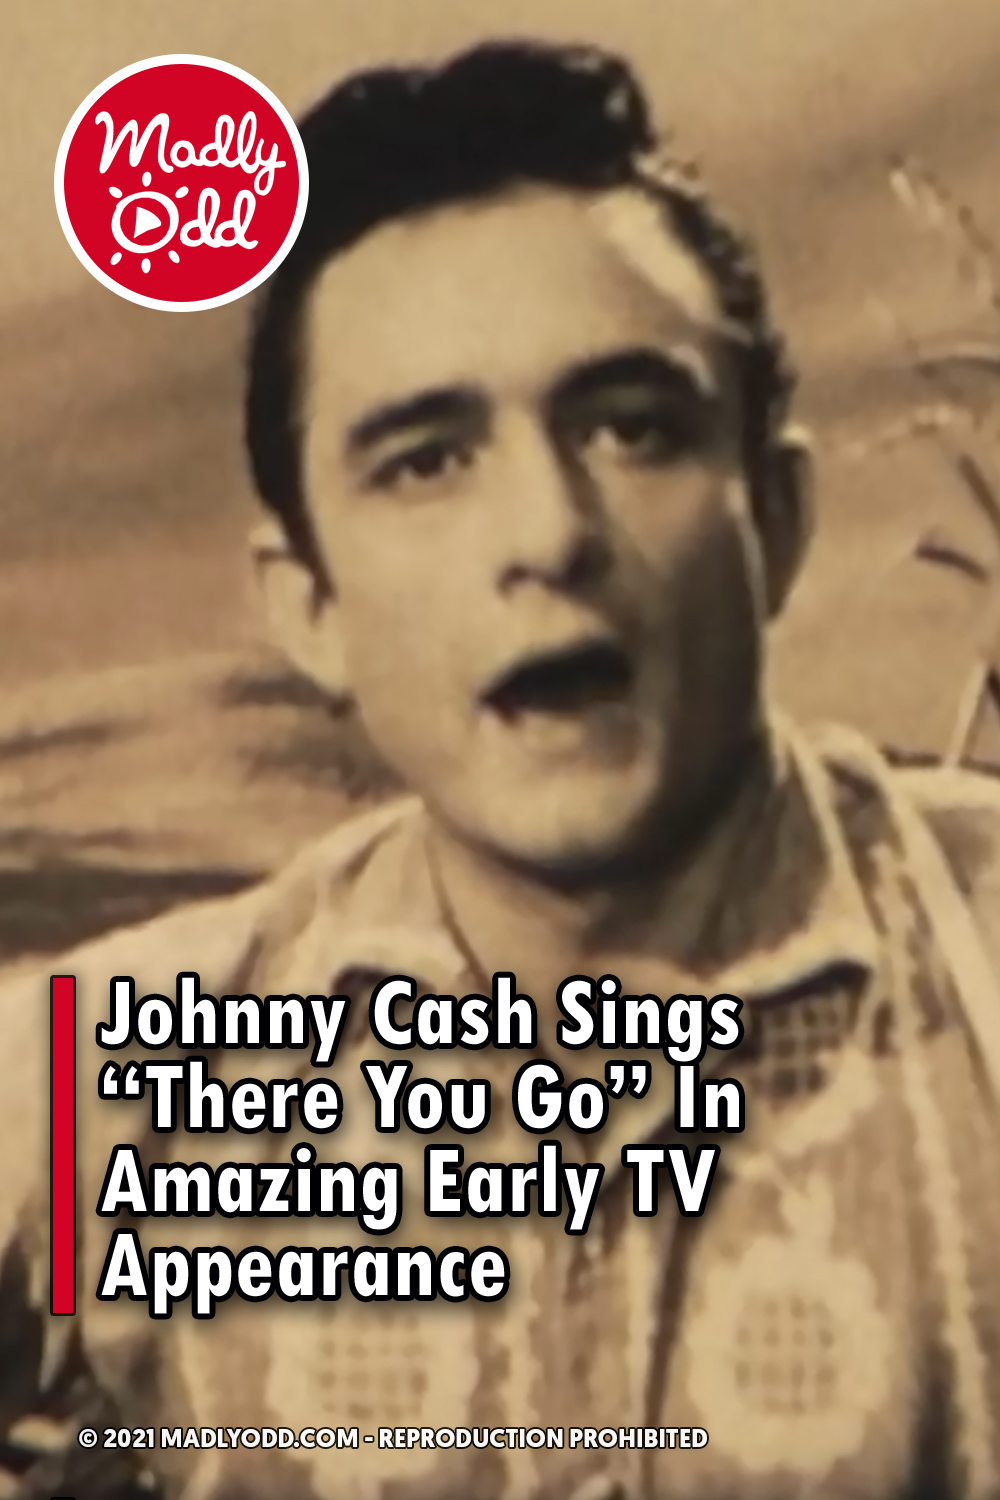 Johnny Cash Sings “There You Go” In Amazing Early TV Appearance